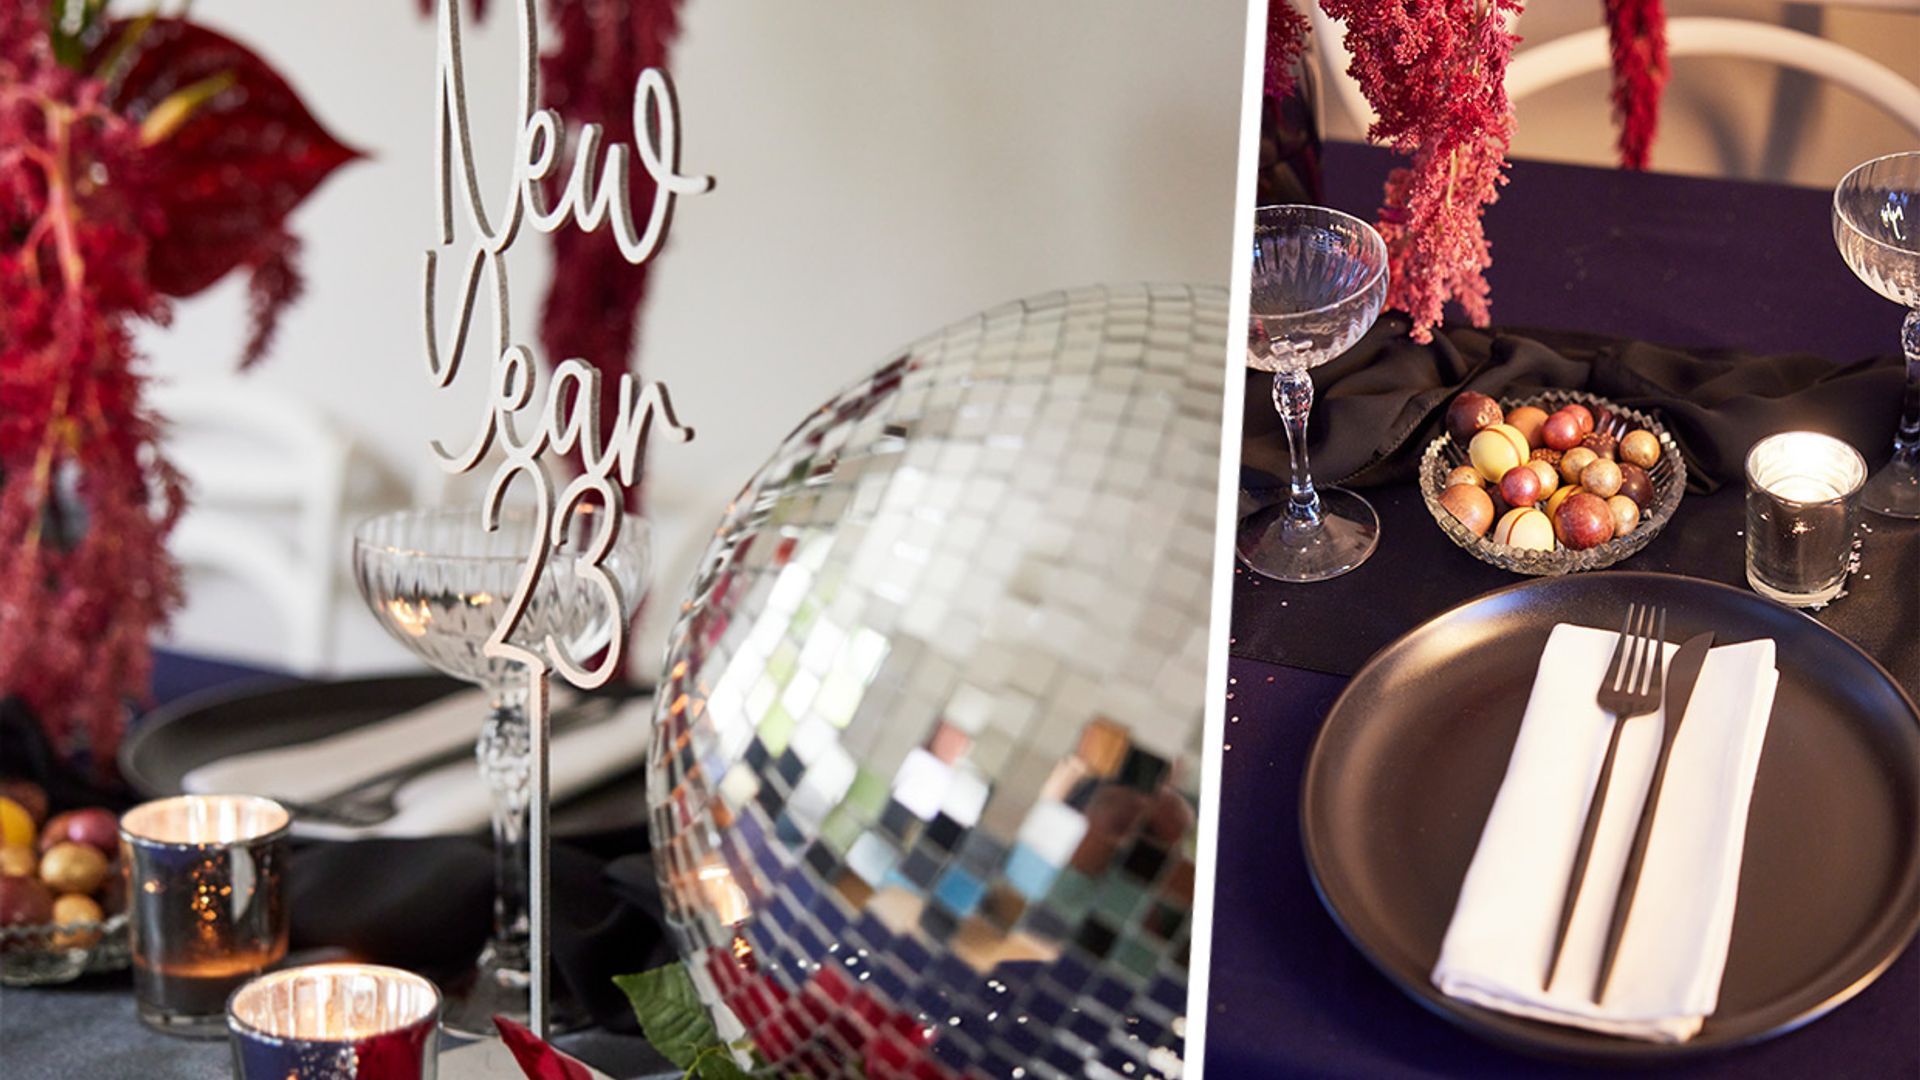 eBay's the place to go for the coolest NYE dinner table pieces - here's the proof